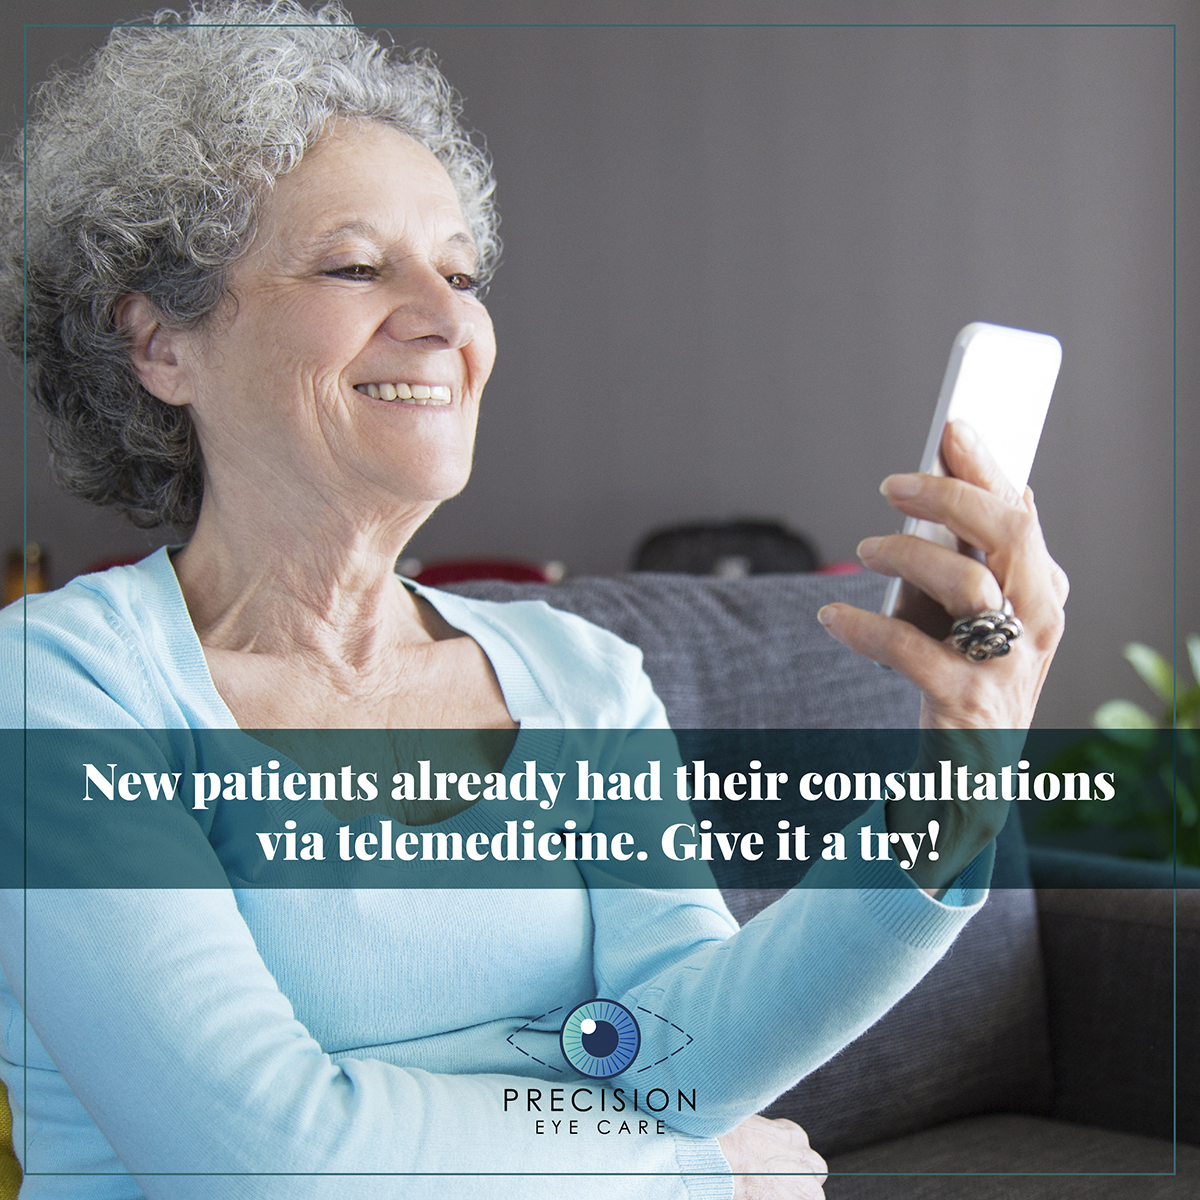 New patients already had their consultations via telemedicine. Give it a try!